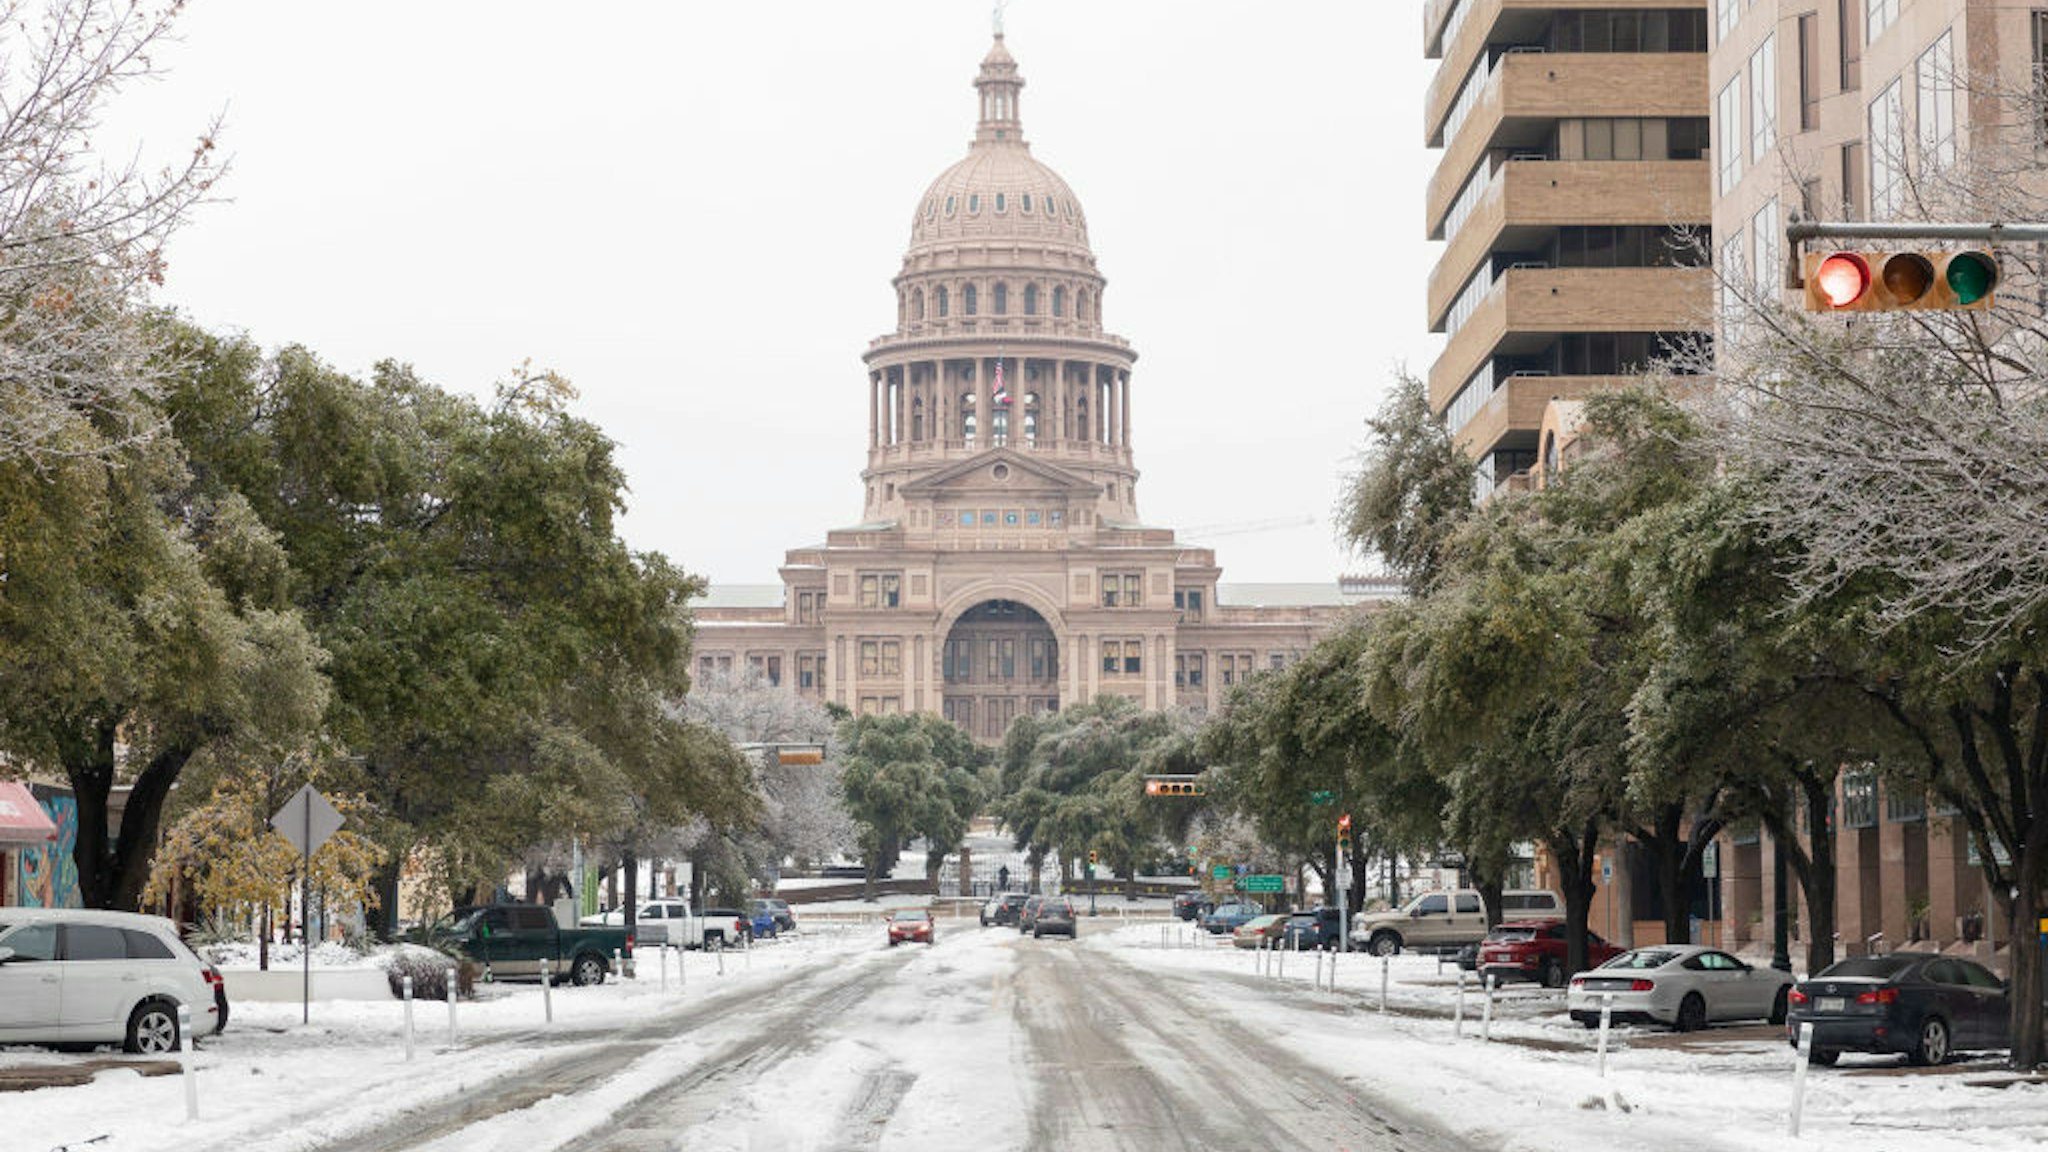 A snow covered road near the Texas State Capitol Building in Austin, Texas, U.S., on Wednesday, Feb. 17, 2021. The crisis that has knocked out power for days to millions of homes and businesses in Texas and across the central U.S. is getting worse, with blackouts expected to last until at least Thursday.